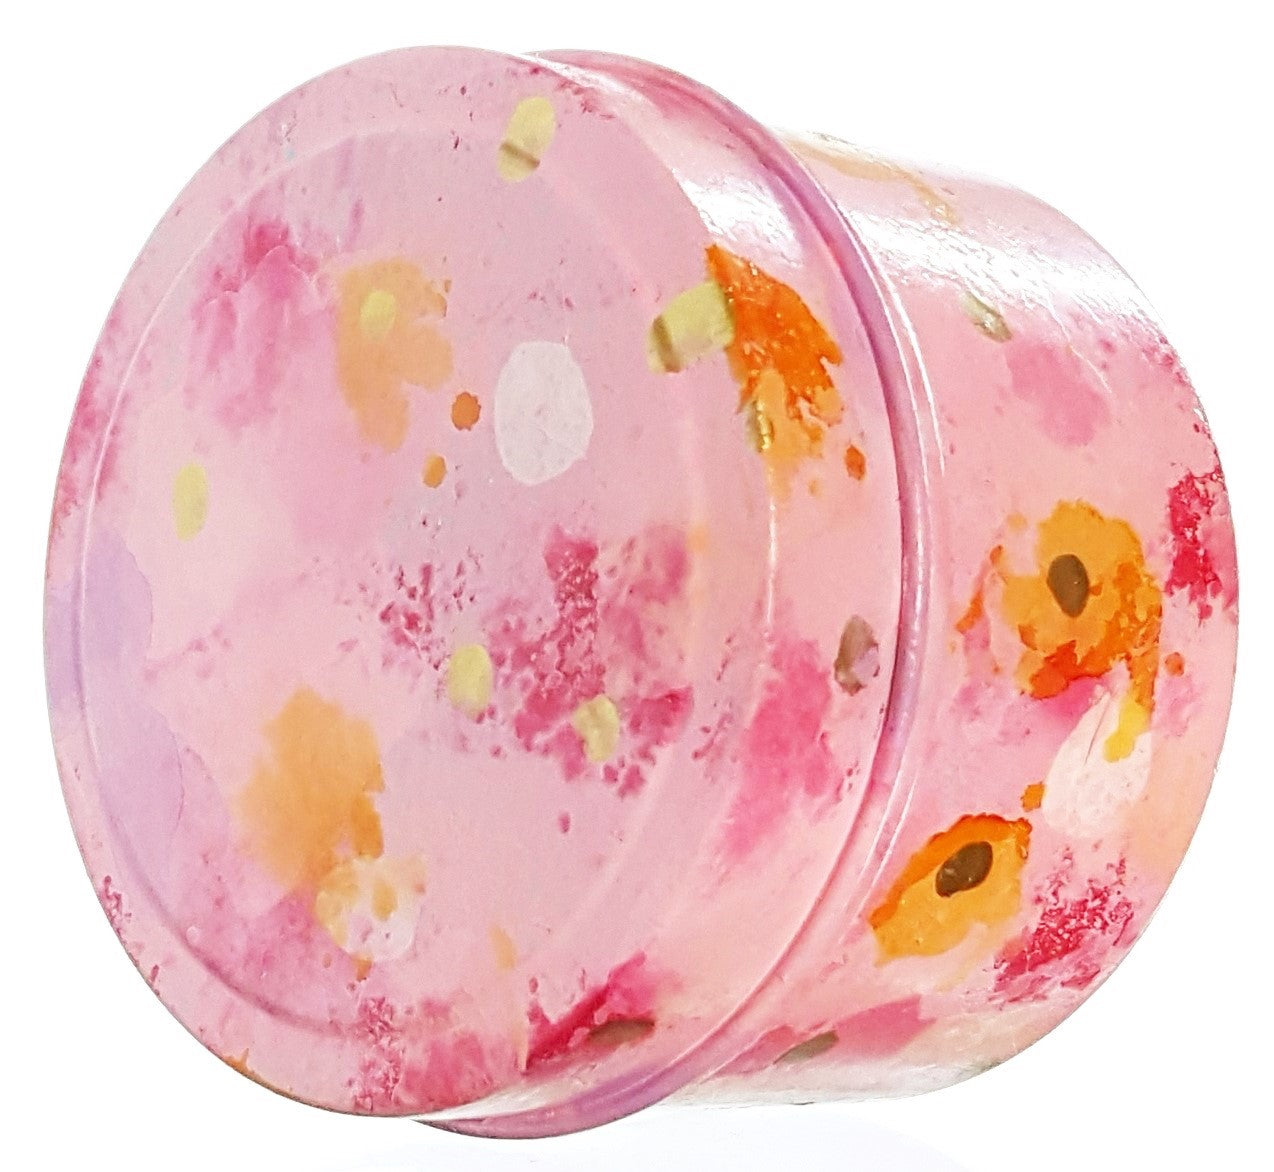 Buy Blossom to Bath Japanese Cherry Blossom Handpainted Soy Wax Candle from Flowersong Soap Studio.  Enjoy one of a kind décor and fill the air with a charming fragrance that lasts for hours  A sophisticated and rich cherry blossom fragrance that is oriental and sensual.